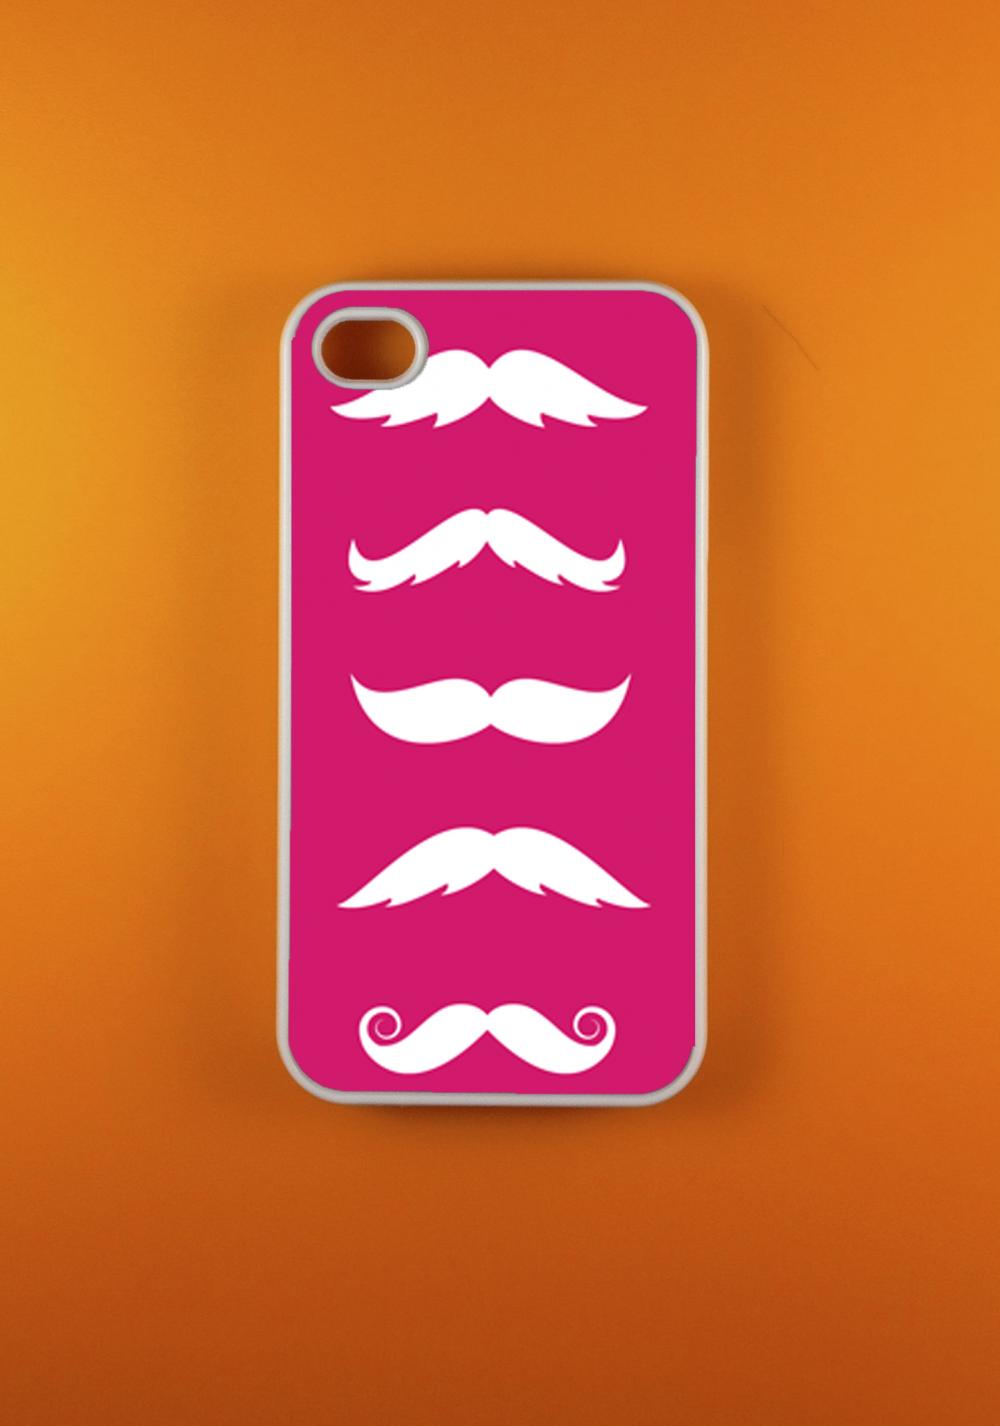 Mustache Iphone 4 Case, Iphone 4s Case, Iphone Case, Iphone 4 Cover